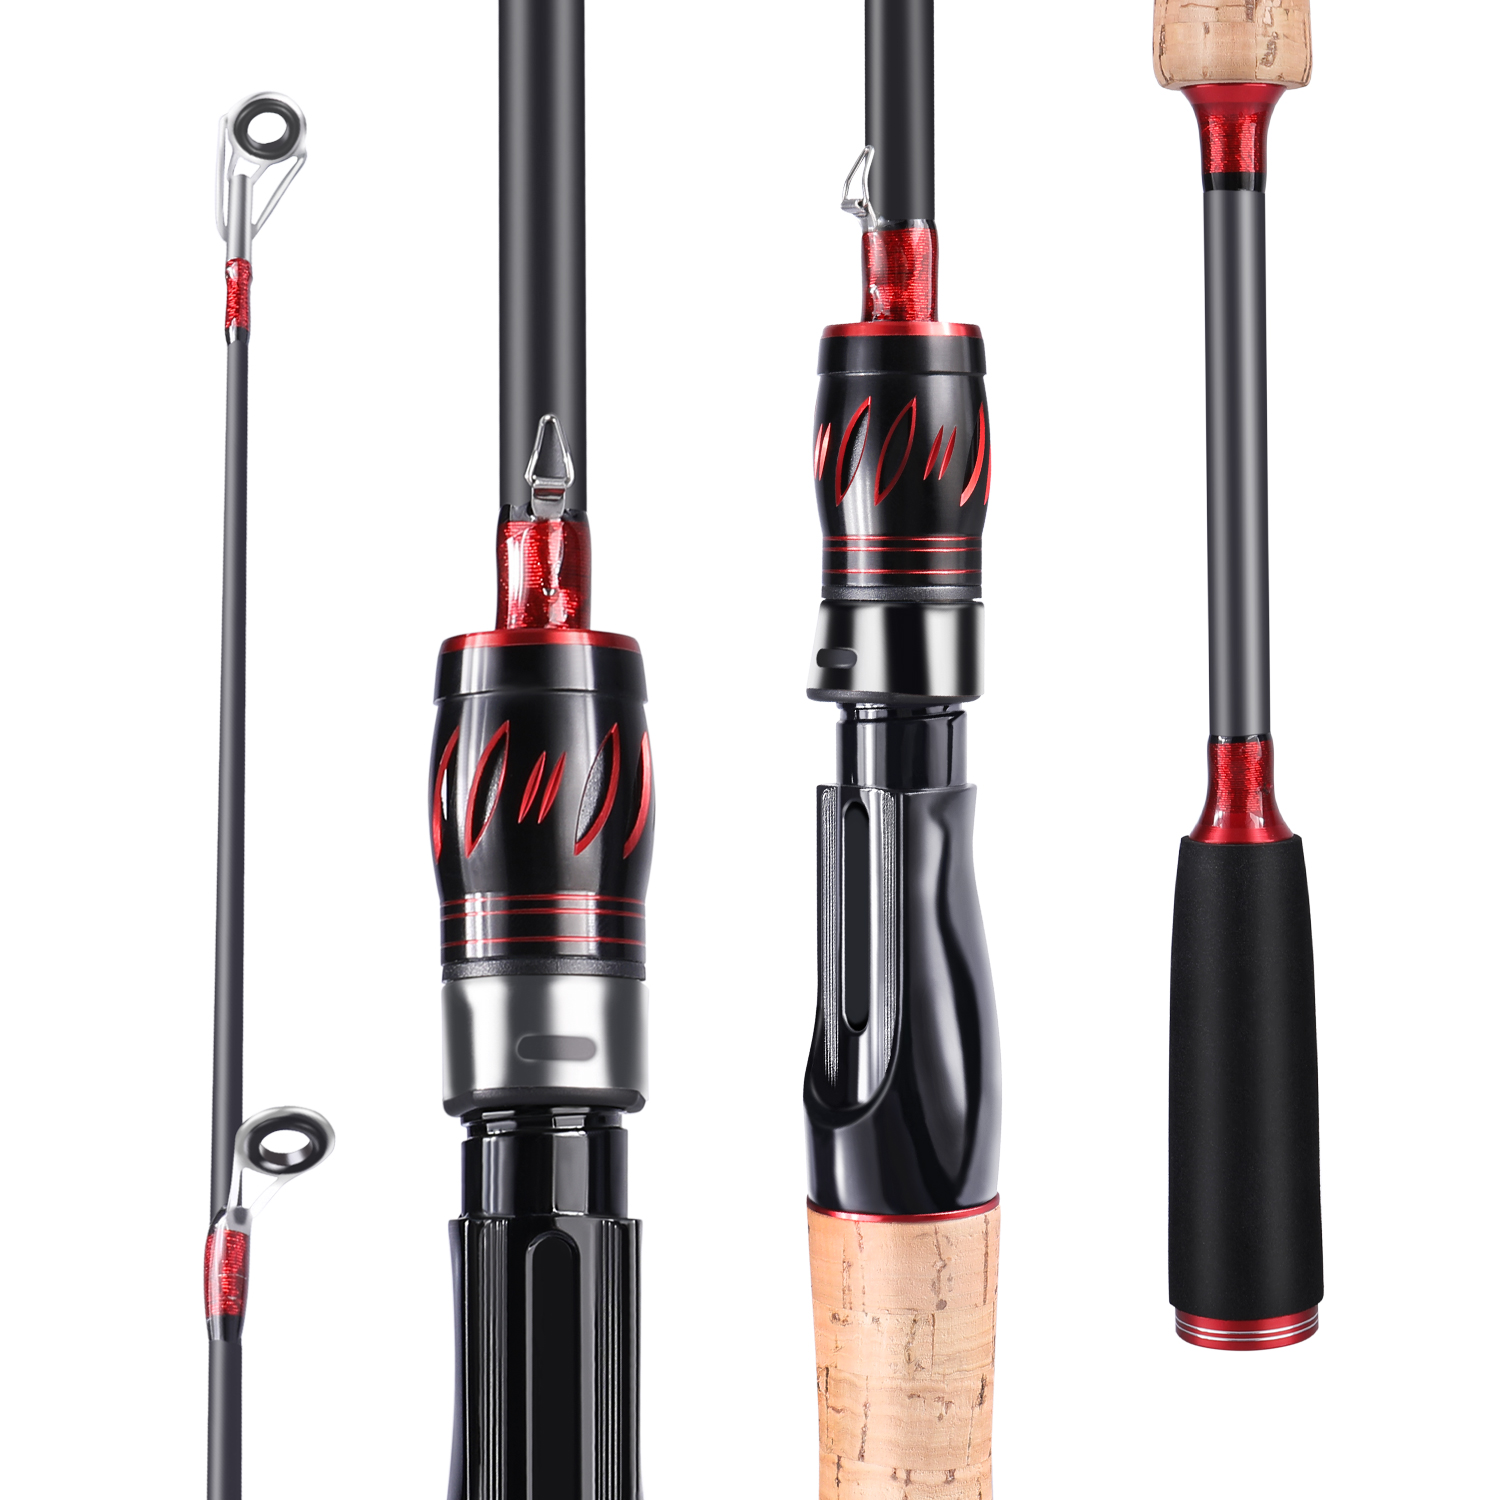 COD]Fishing Rod Carbon Ultra Light Portable Casting Spinning